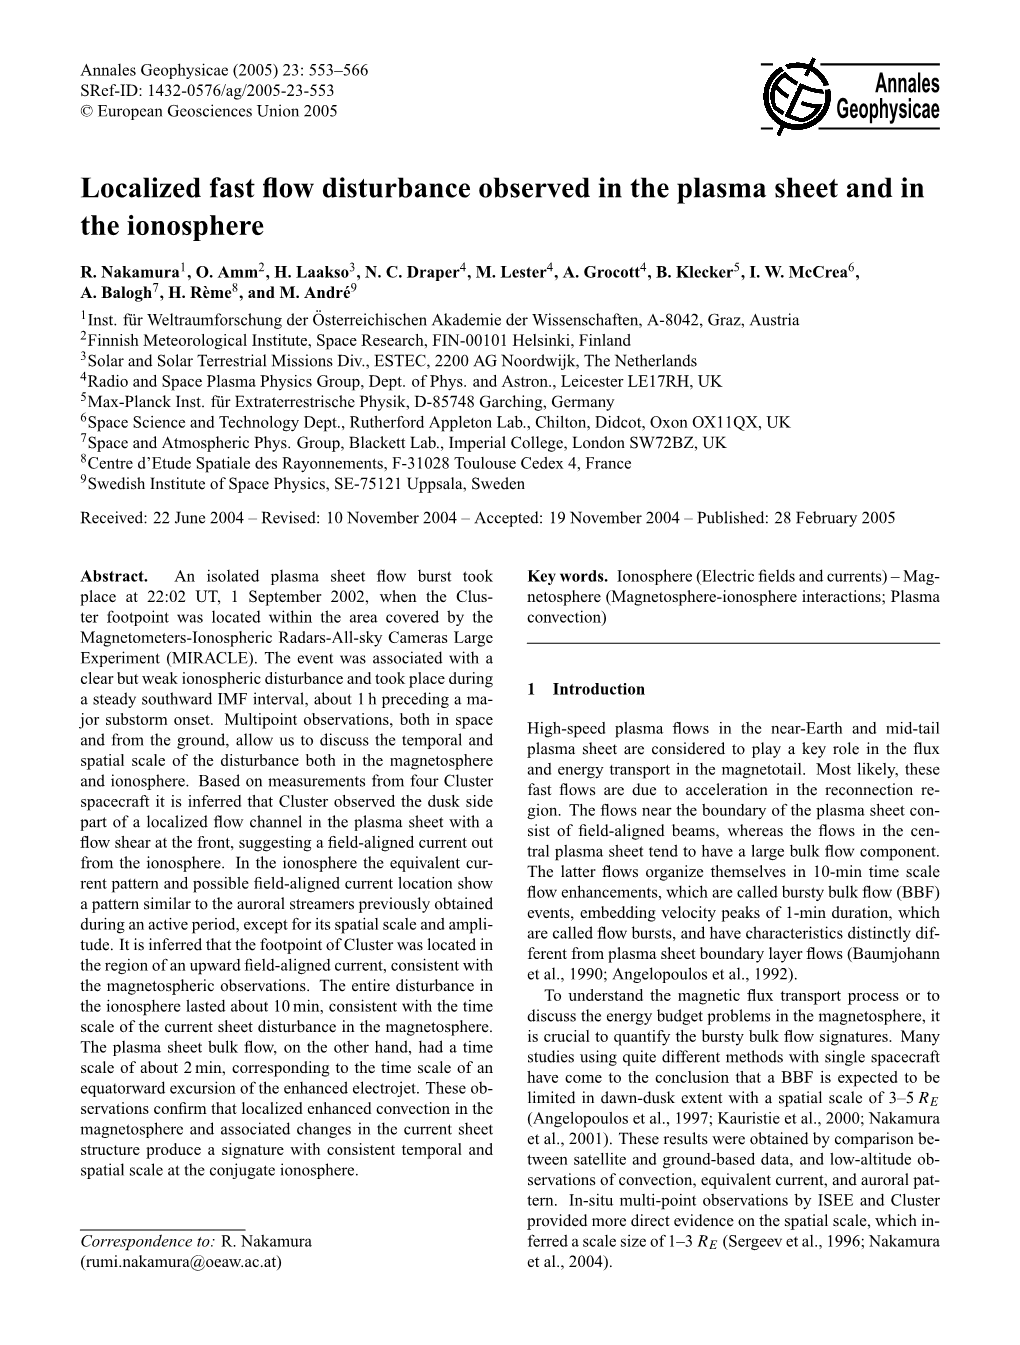 Localized Fast Flow Disturbance Observed in the Plasma Sheet And